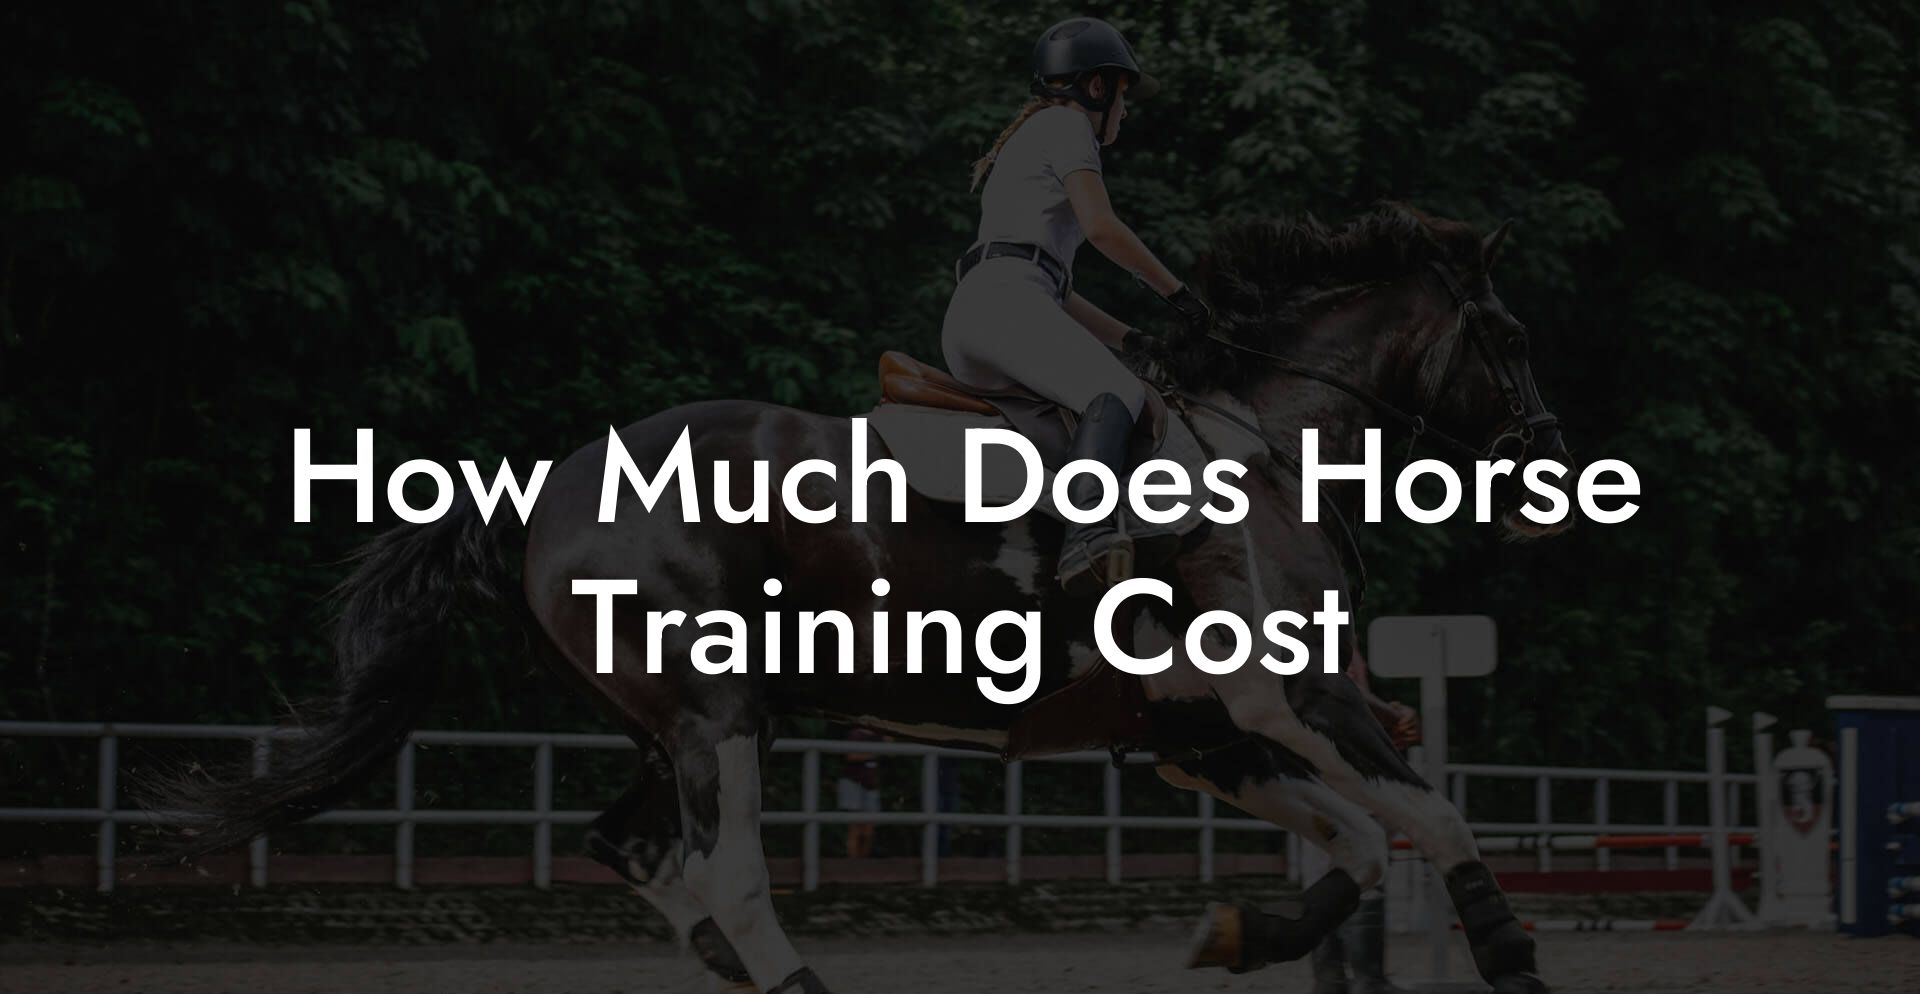 How Much Does Horse Training Cost